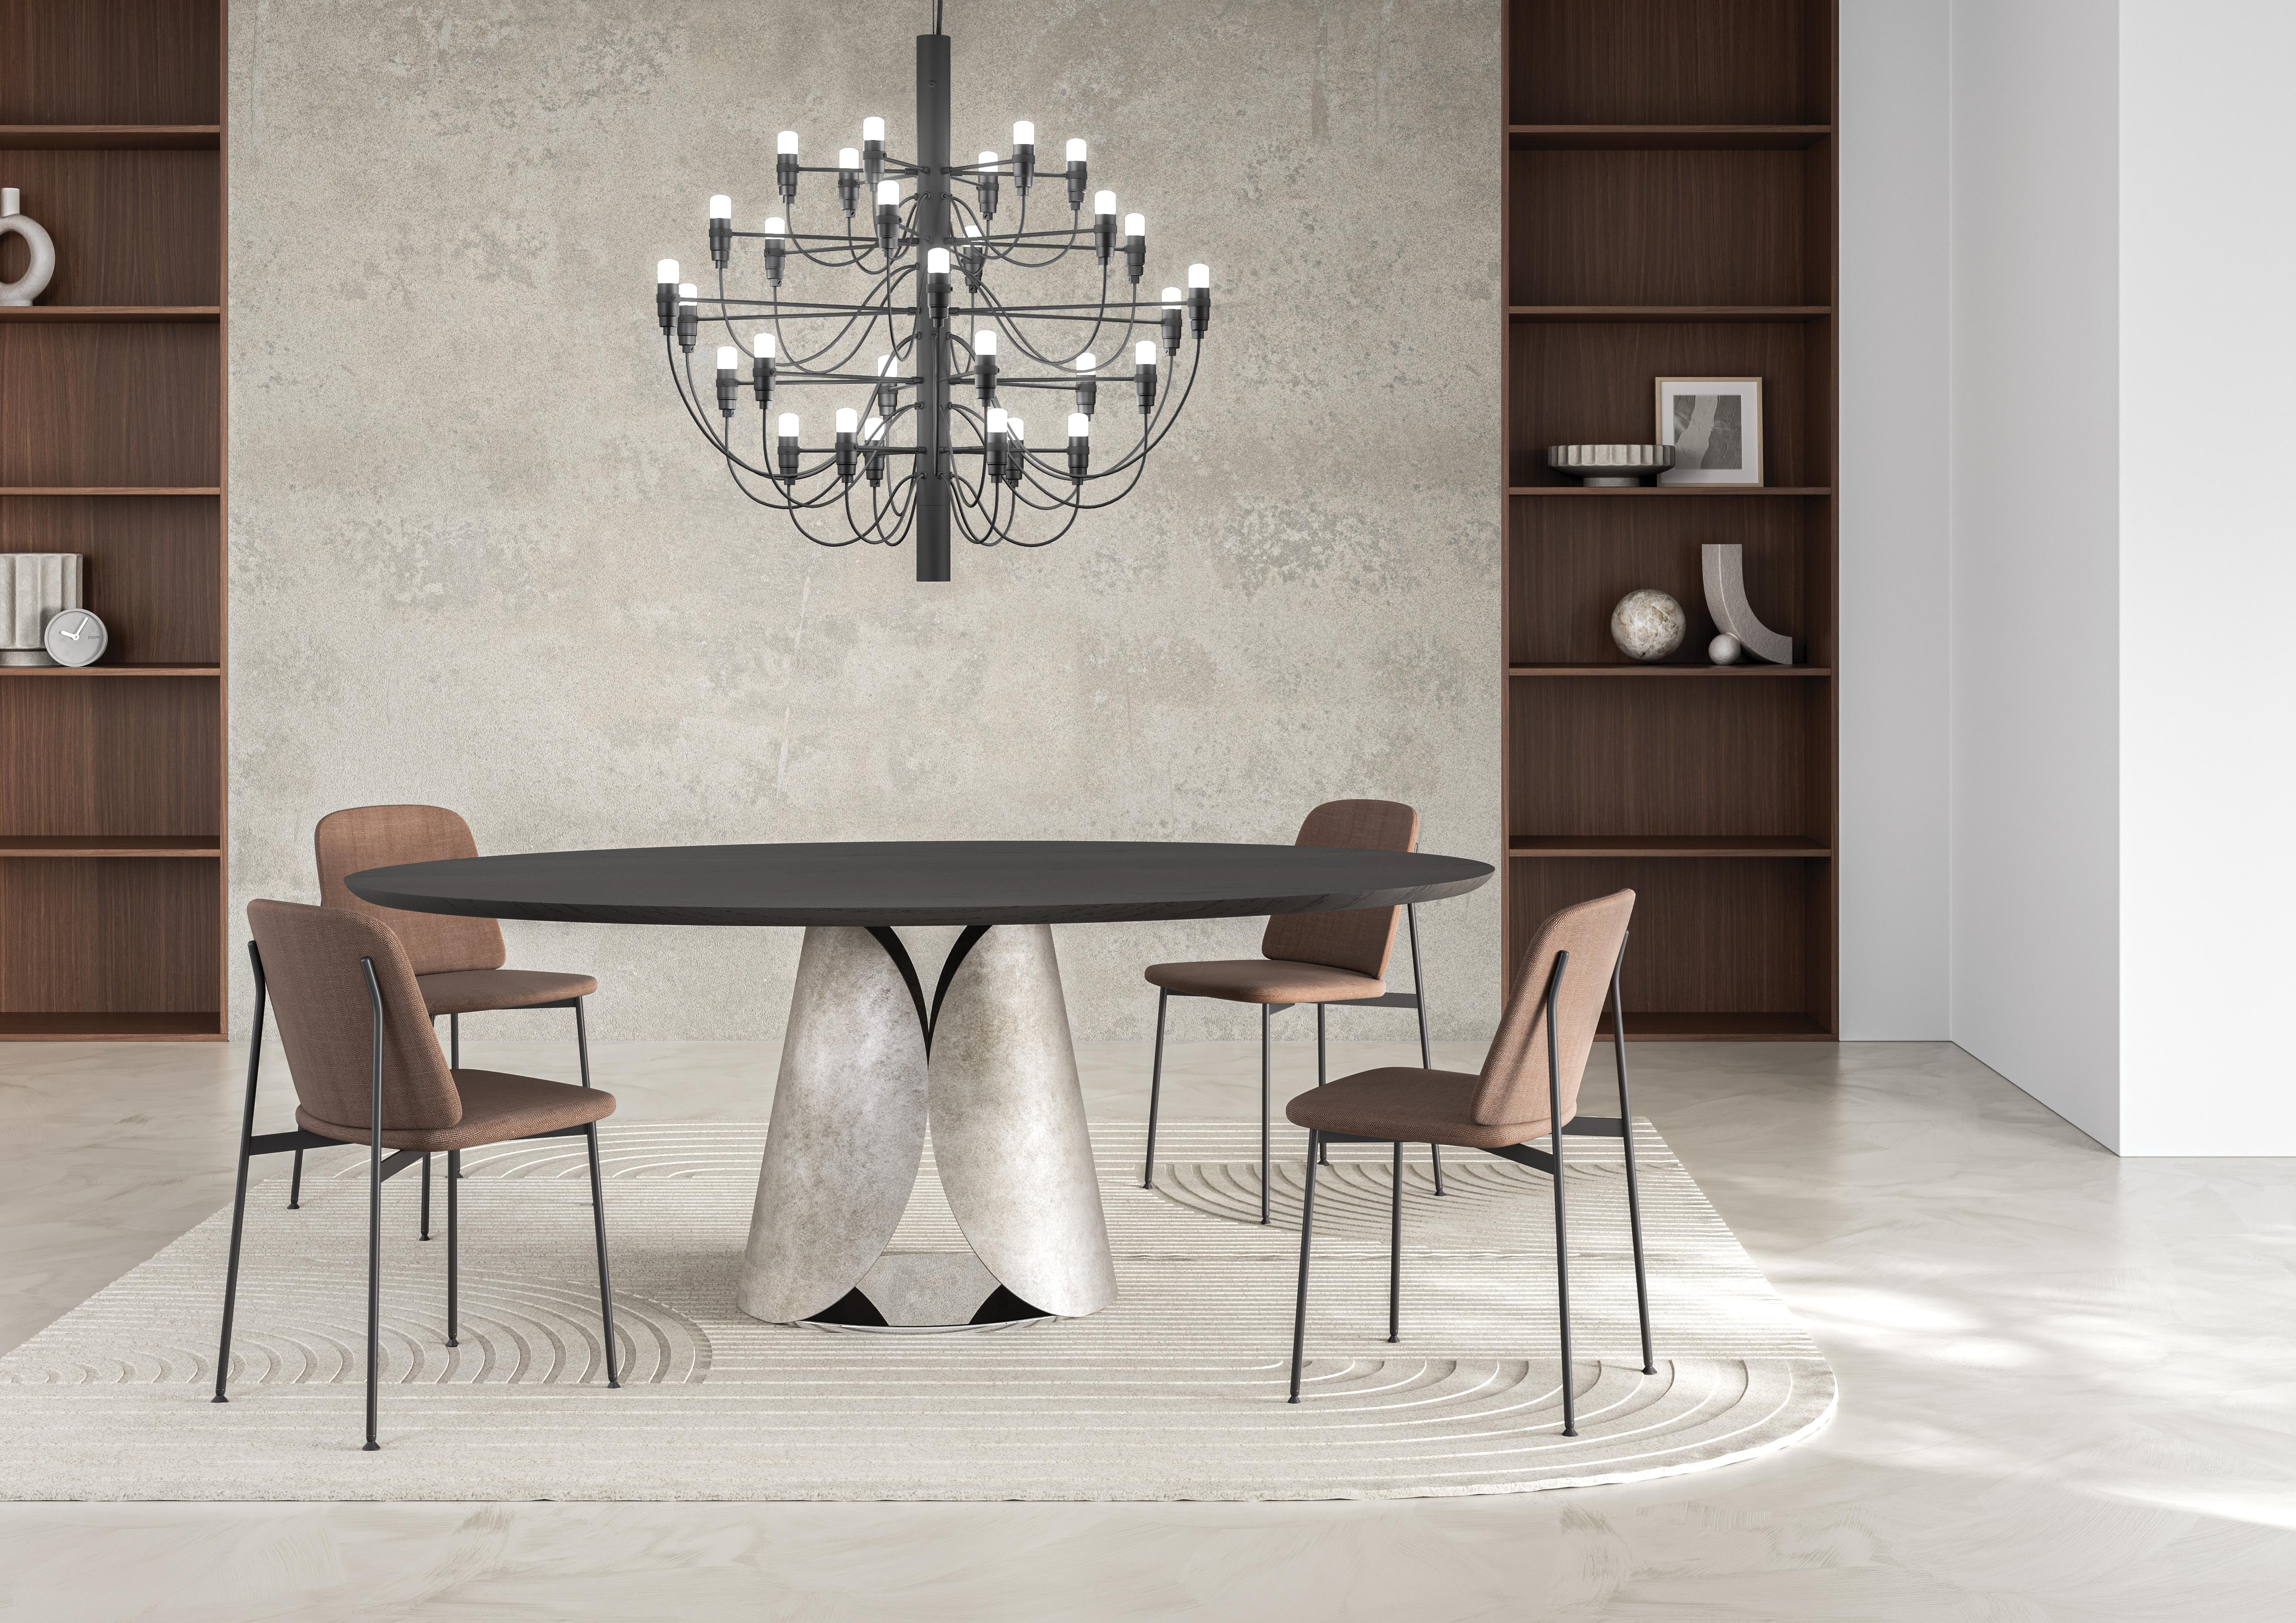 Estia Dining Table by Chinellato Design
Dimensions: D 110 x W 200 x H 71 cm
Materials:
Top:  Thermally Treated Oak.
Base: Black Patinated Silver Leaf finish.

In this table, graceful curves take center stage, exuding an enveloping softness that